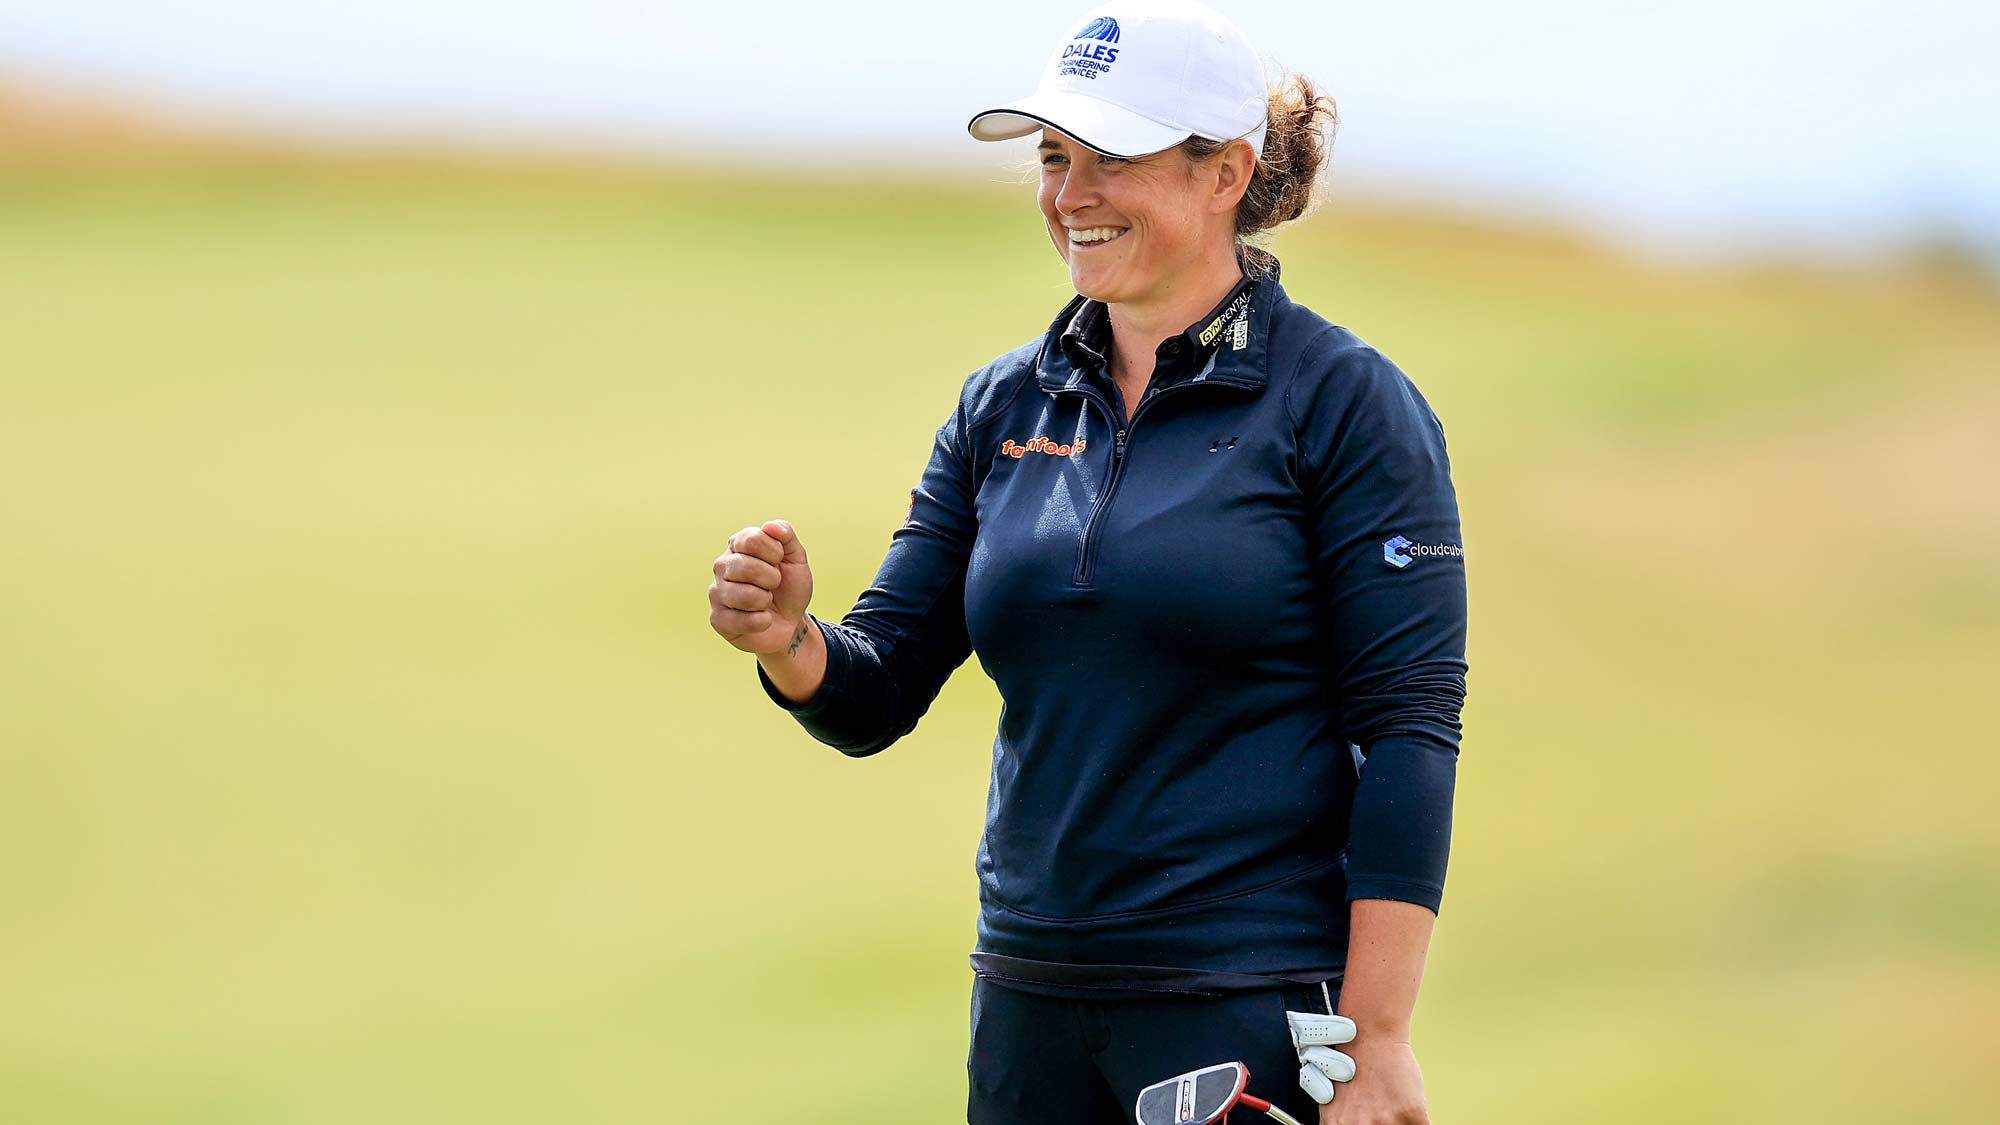 Michelle Thompson of Scotland celebrates a birdie putt on the 18th hole during the first round of the Trust Golf Women's Scottish Open